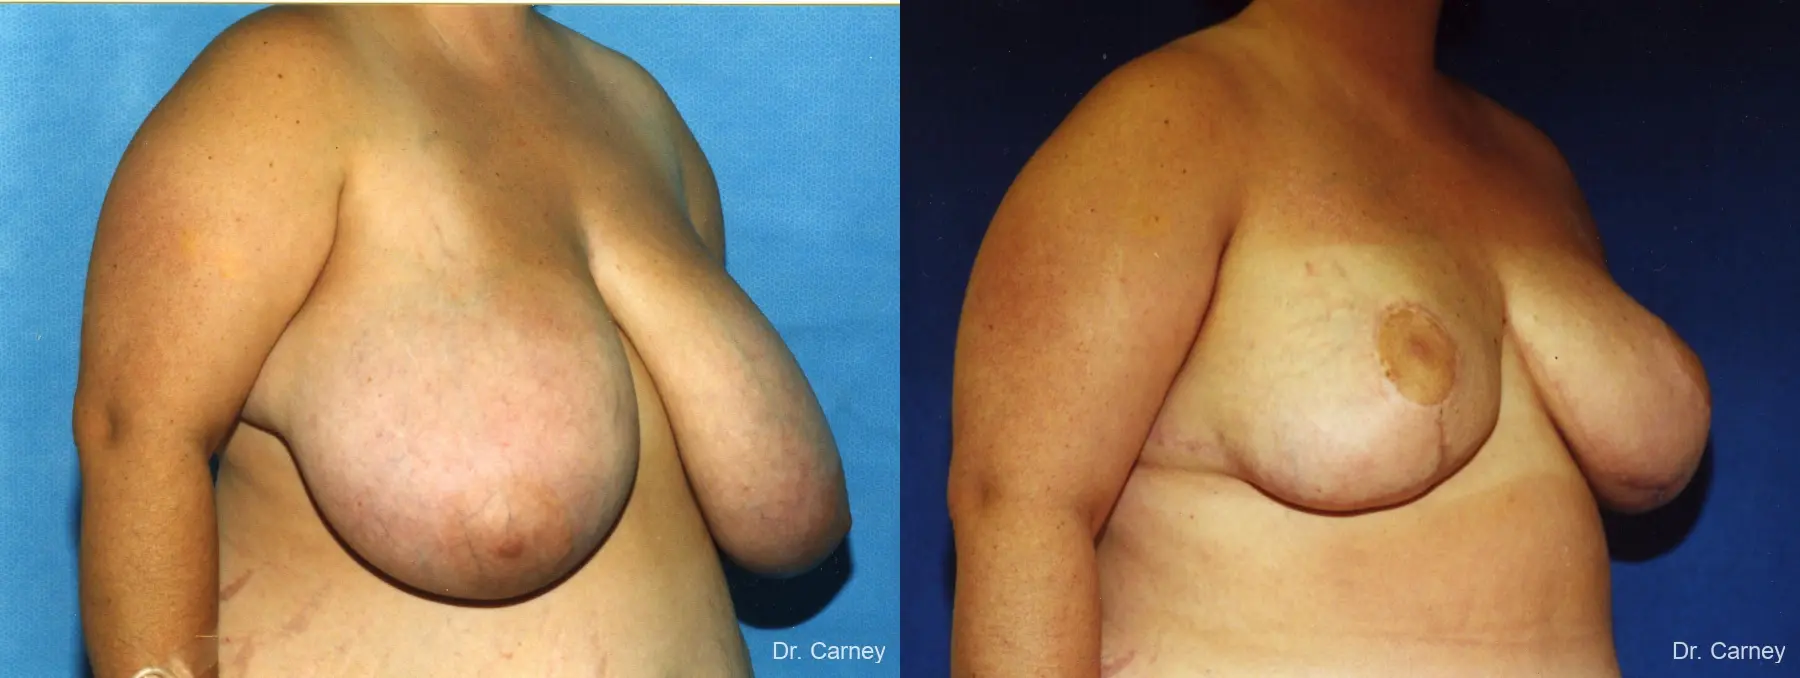 Virginia Beach Breast Reduction 1232 - Before and After